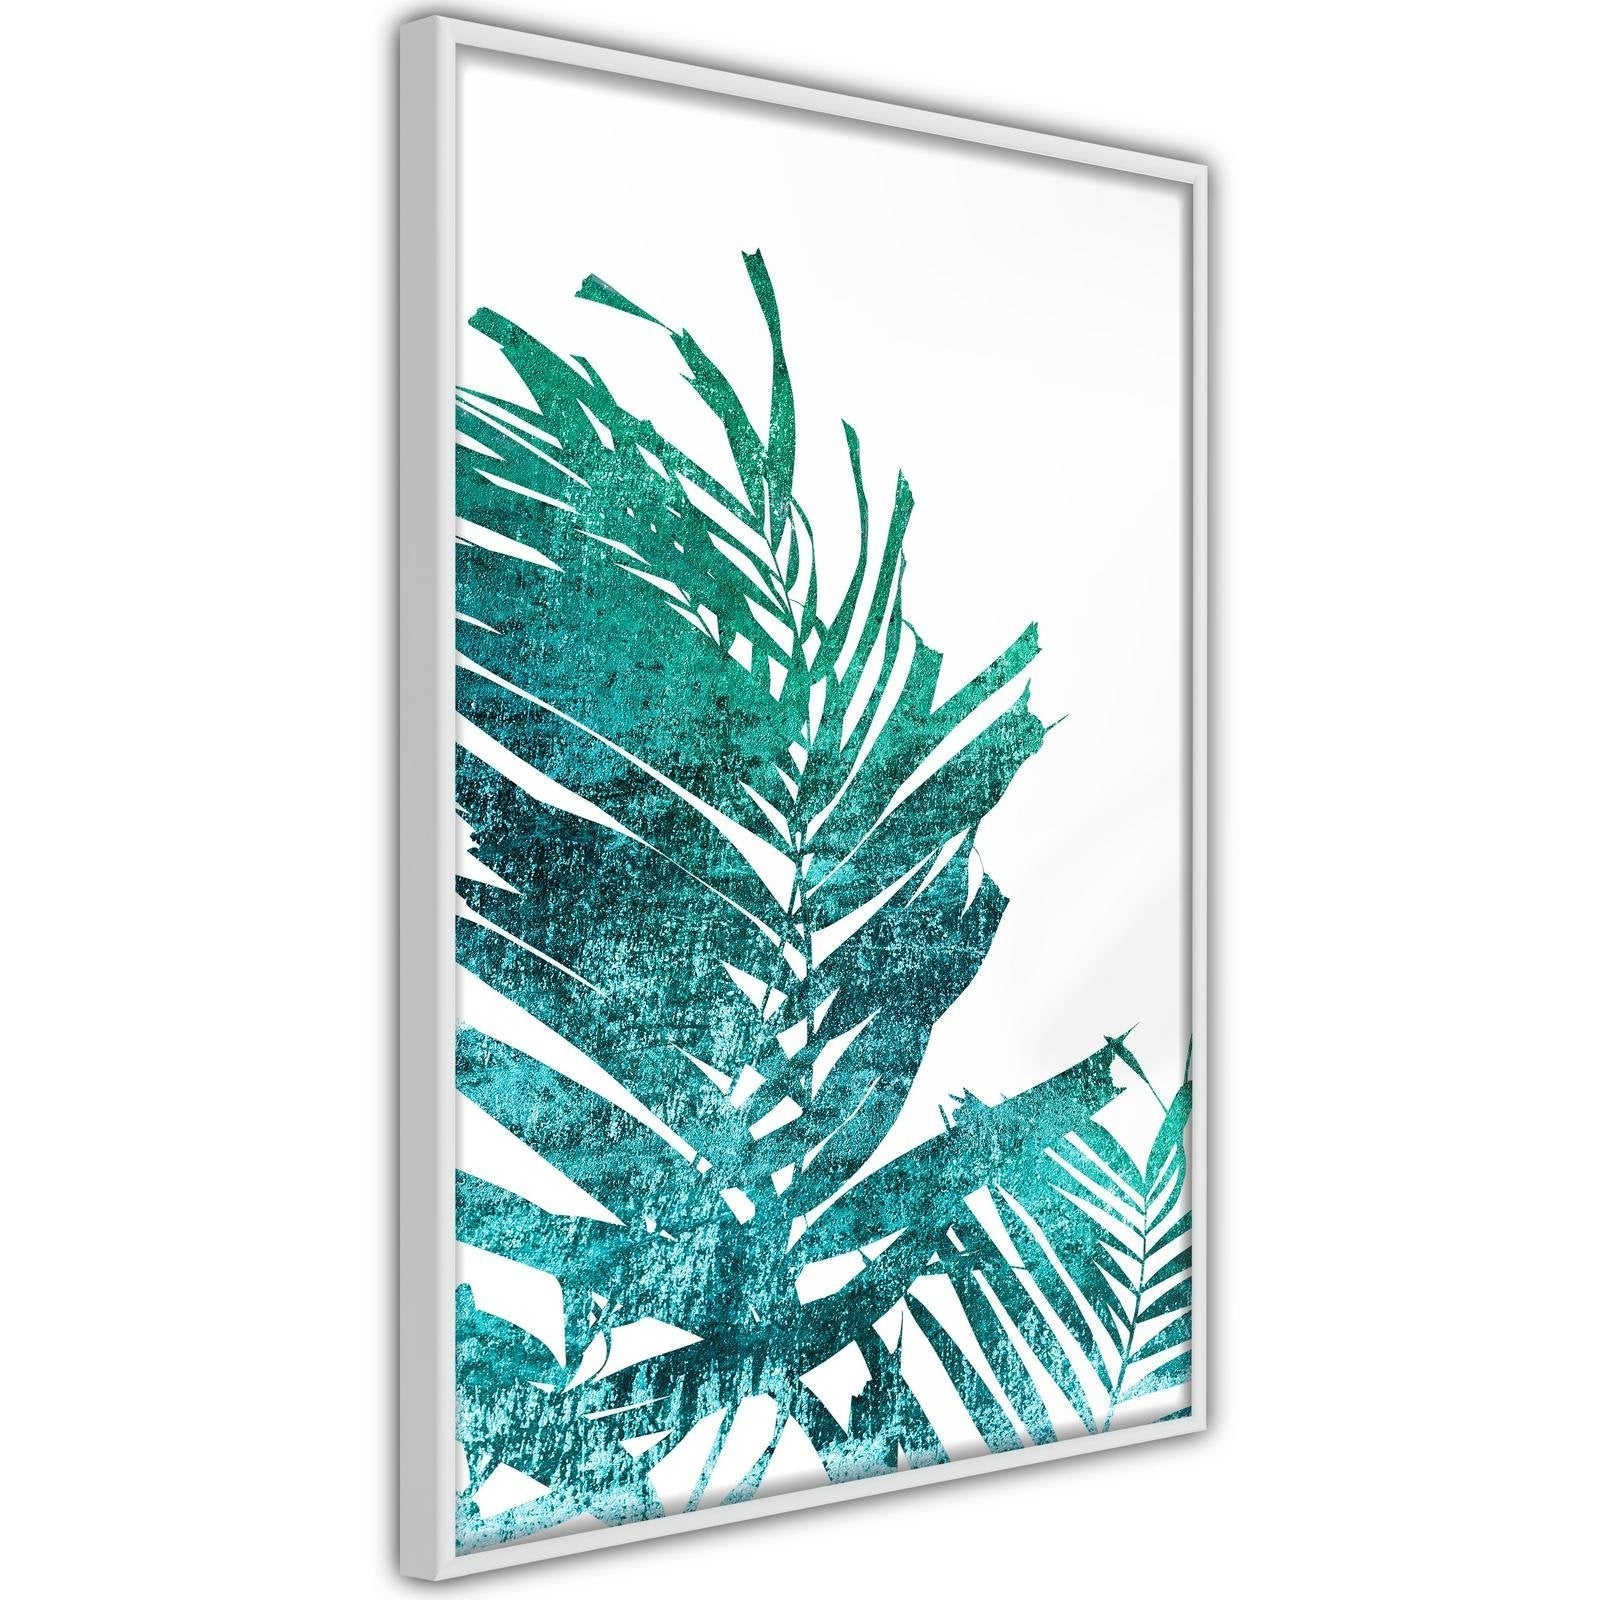 Inramad Poster / Tavla - Teal Palm on White Background-Poster Inramad-Artgeist-peaceofhome.se